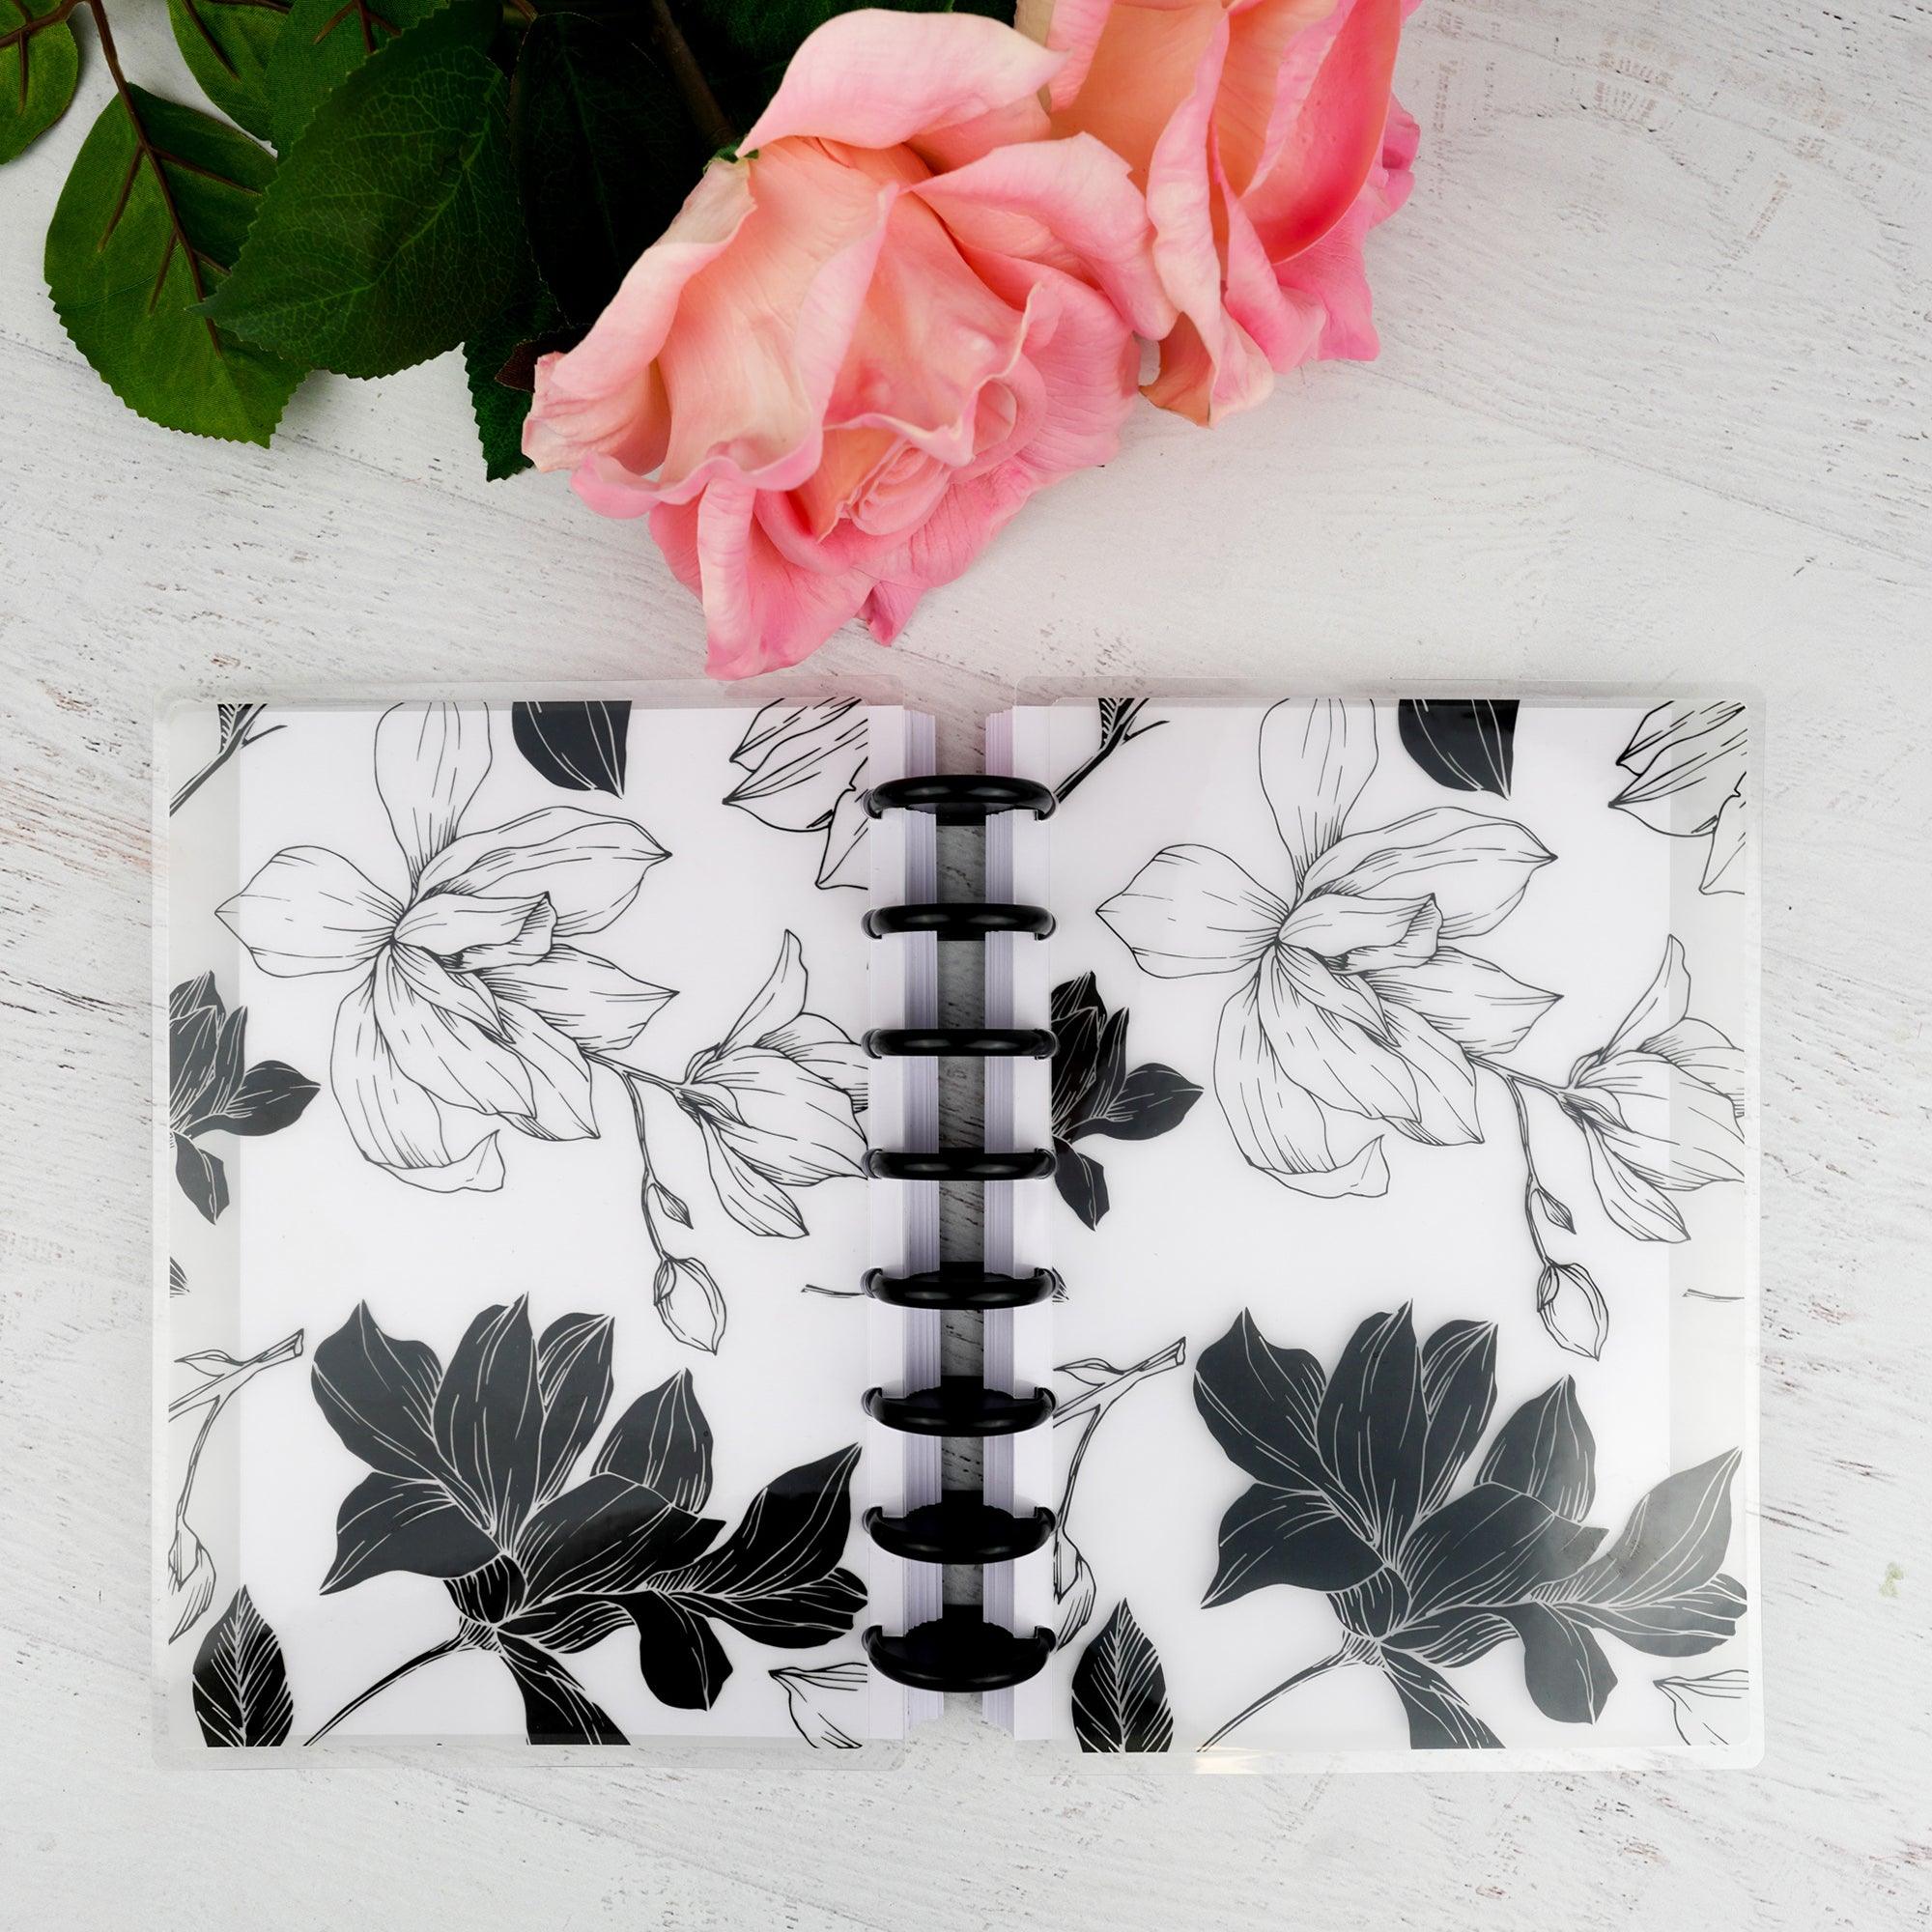 Transparent Disc-bound Planner Cover by Jane's AgendaMagnolia Floral Planner Cover Vellum for Mini, Junior, Classic, and Letter size discbound planners and notebooks by Jane's Agenda